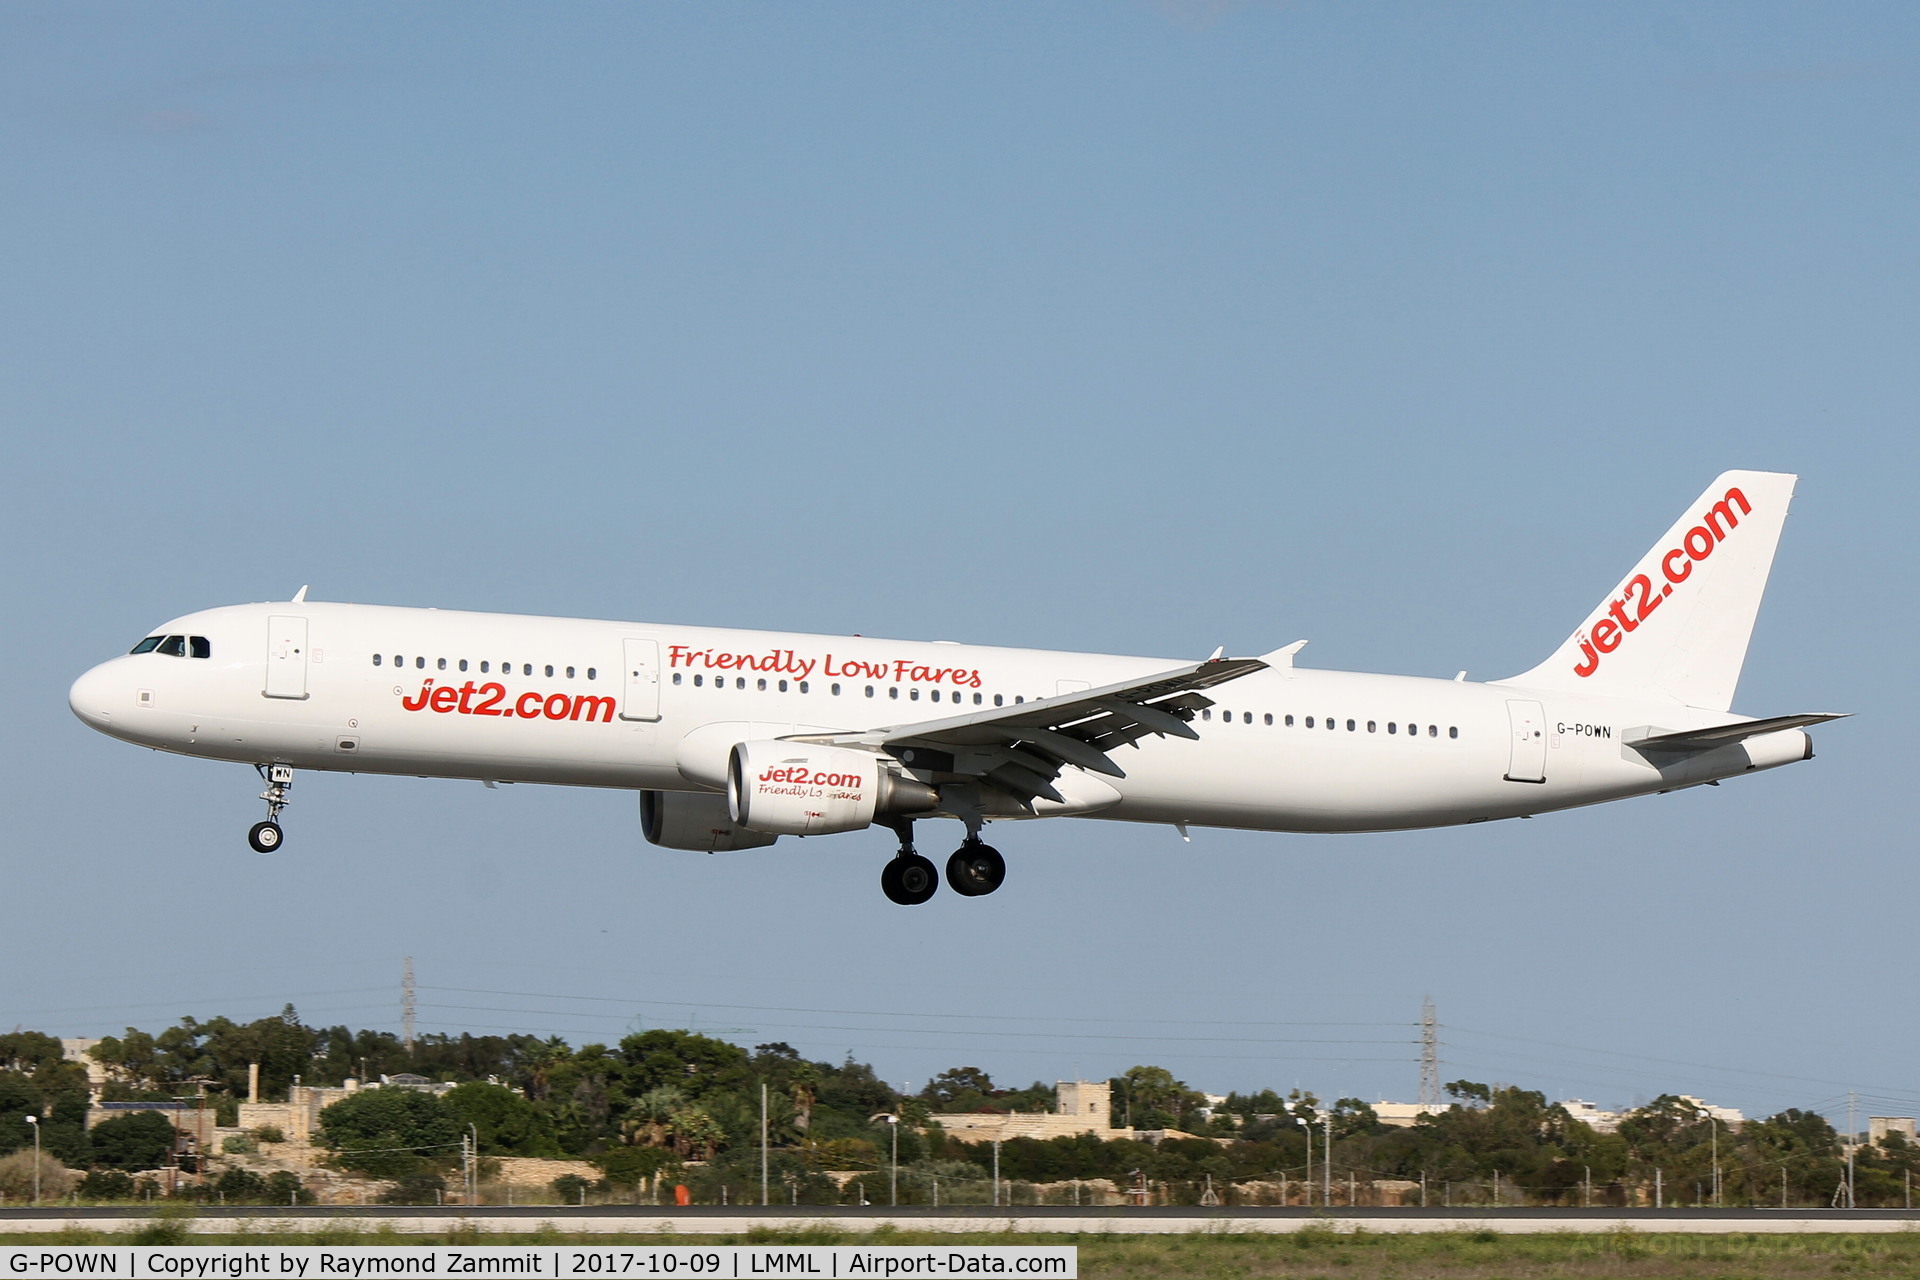 G-POWN, 2009 Airbus A321-211 C/N 3830, A321 G-POWN on lease to Jet2Com seen here on final approach to RW31 in Malta.